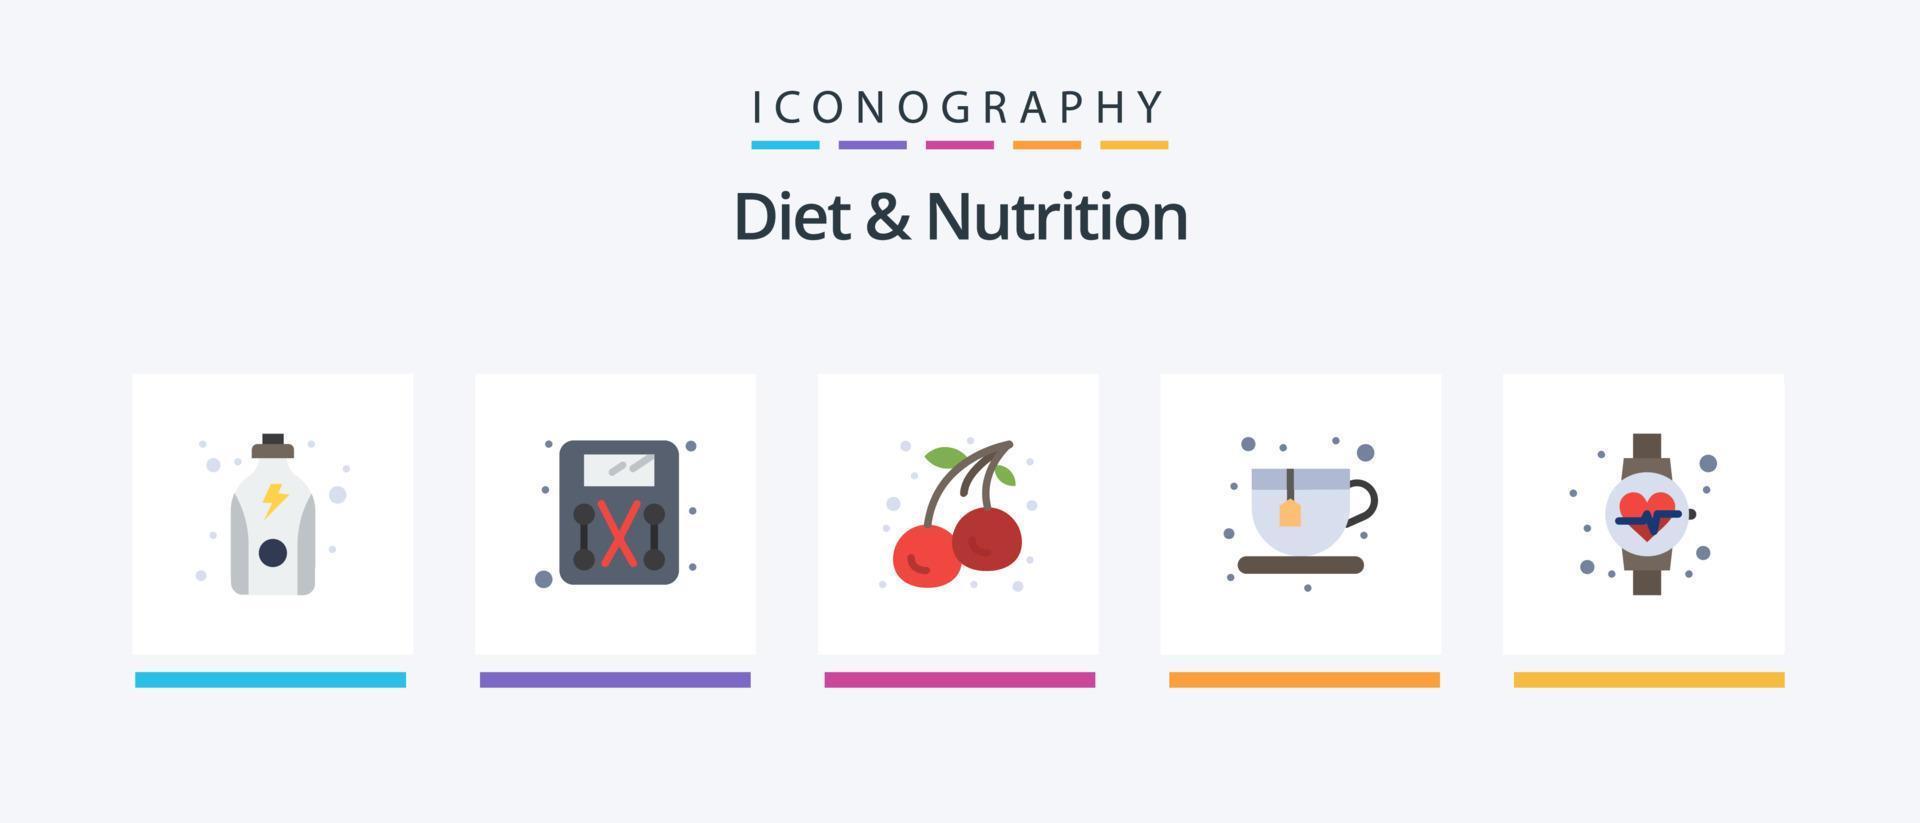 Diet And Nutrition Flat 5 Icon Pack Including . watch. cherry. diet. tea. Creative Icons Design vector